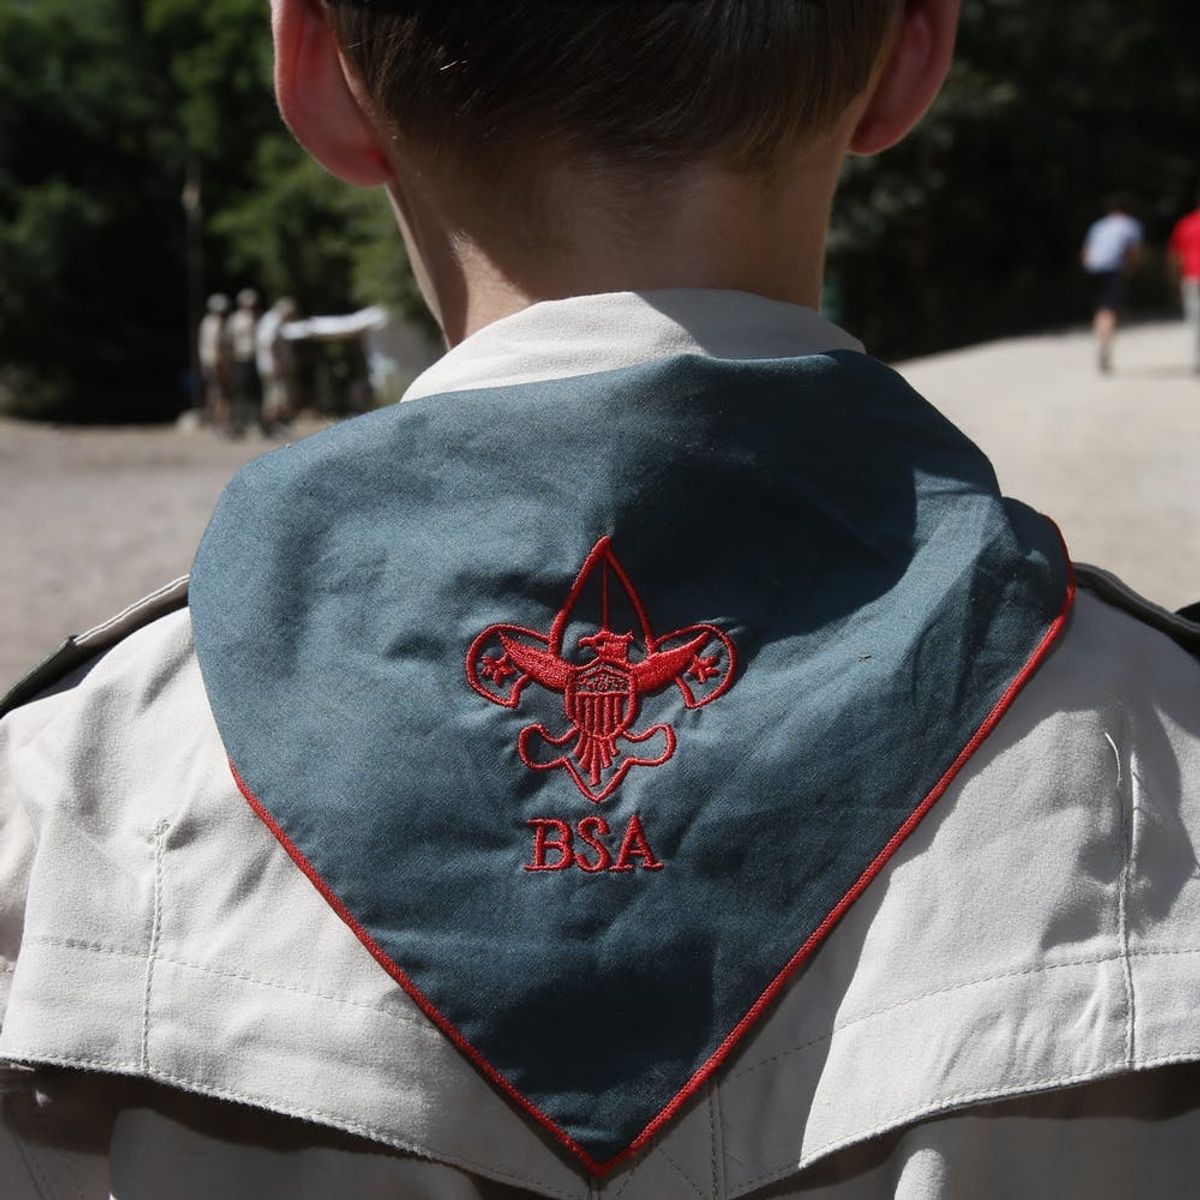 The Boy Scouts of America Will Now Allow Girls to Join